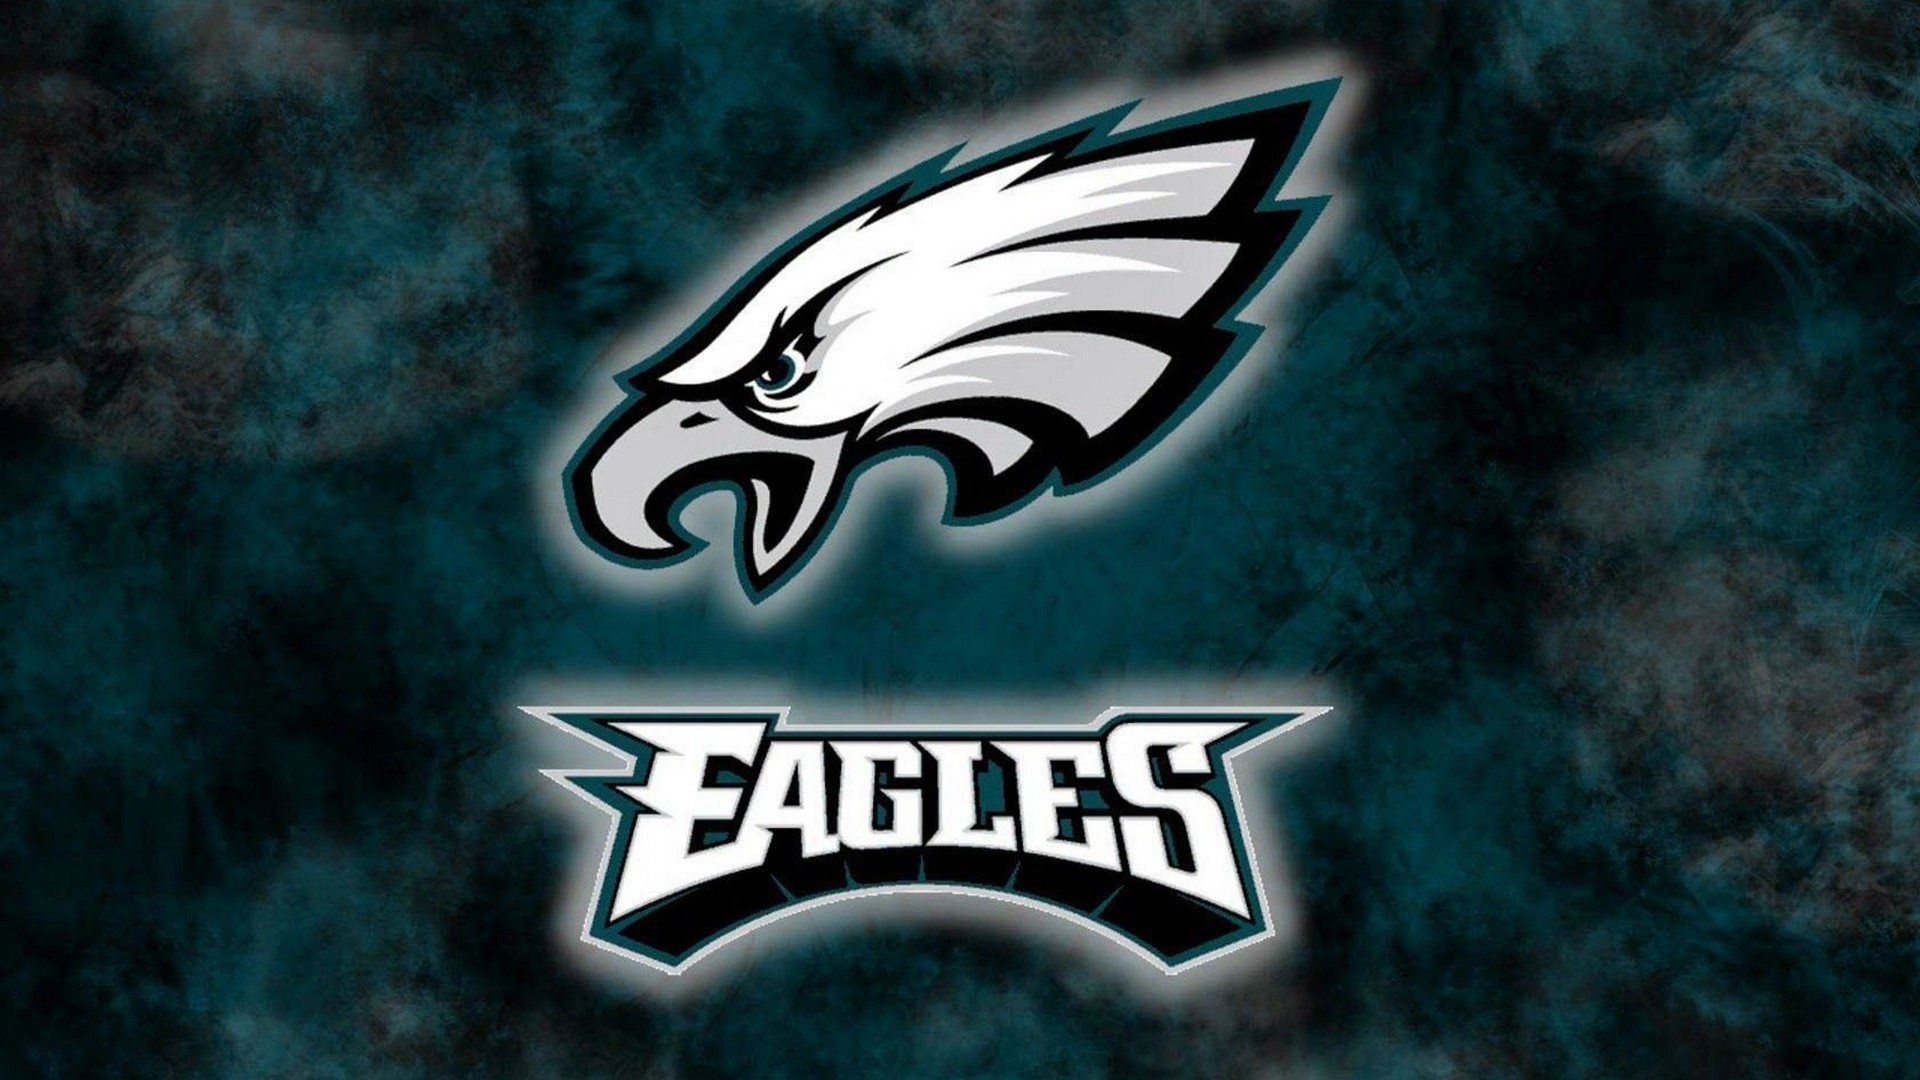 Phila Eagles Desktop Wallpaper With Resolution 1920X1080 pixel. You can make this wallpaper for your Mac or Windows Desktop Background, iPhone, Android or Tablet and another Smartphone device for free